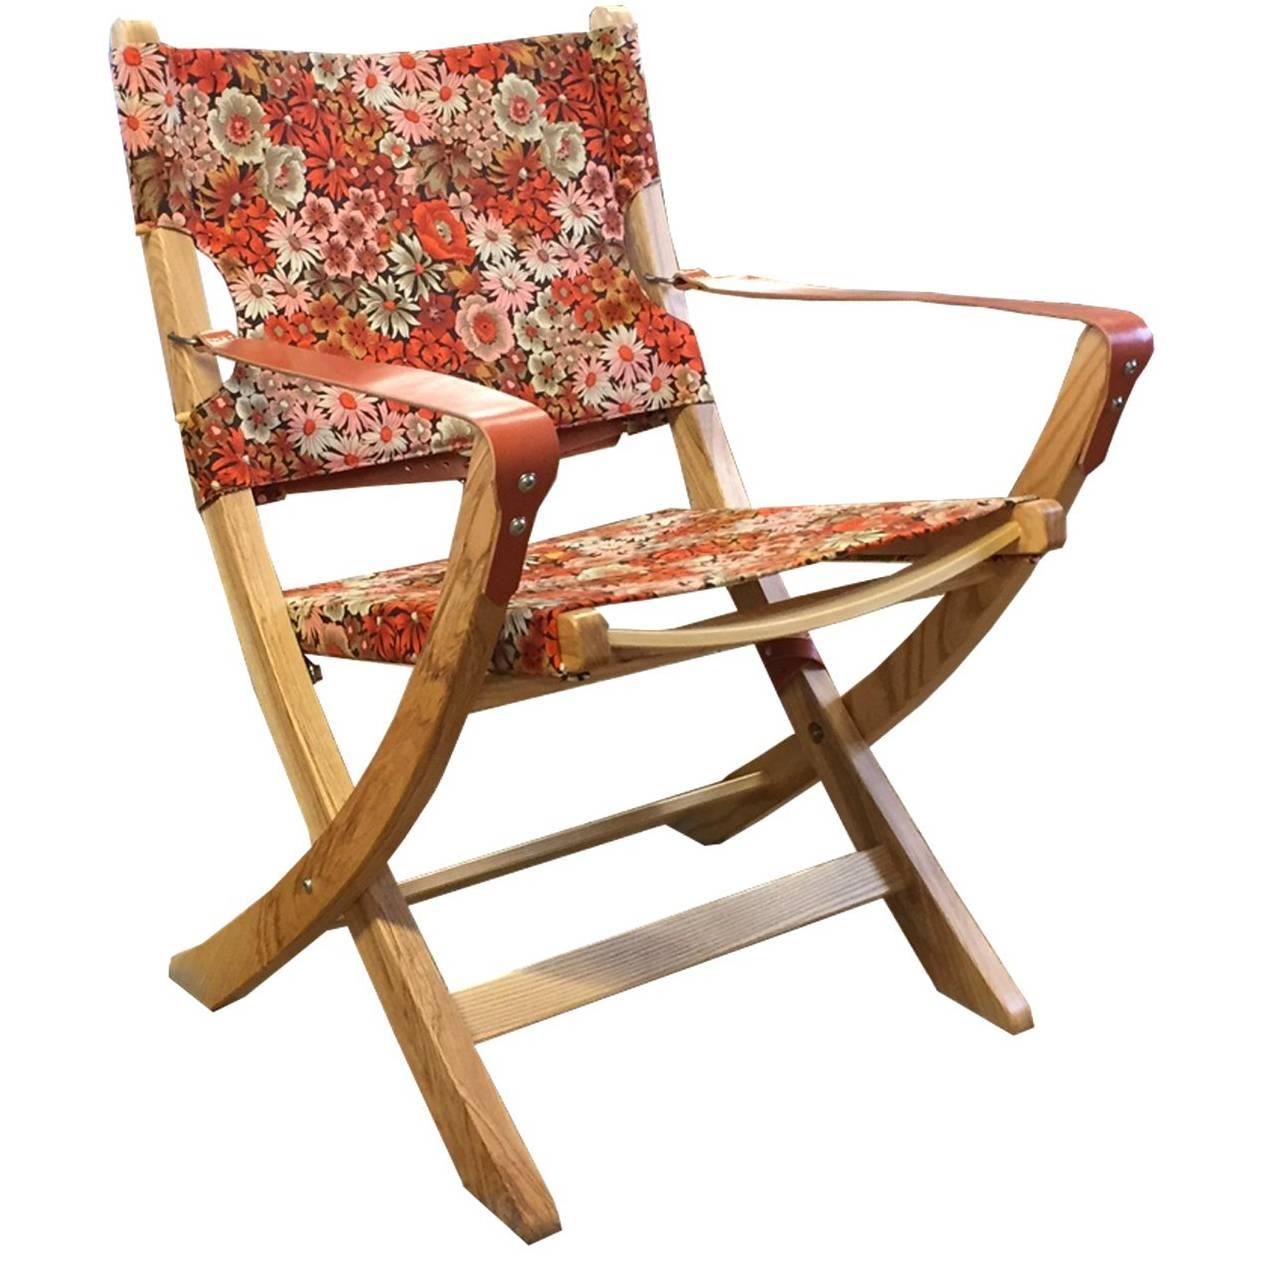 Vintage Fabric Campaign Chair Retro Floral Handcrafted One-Off Design Piece